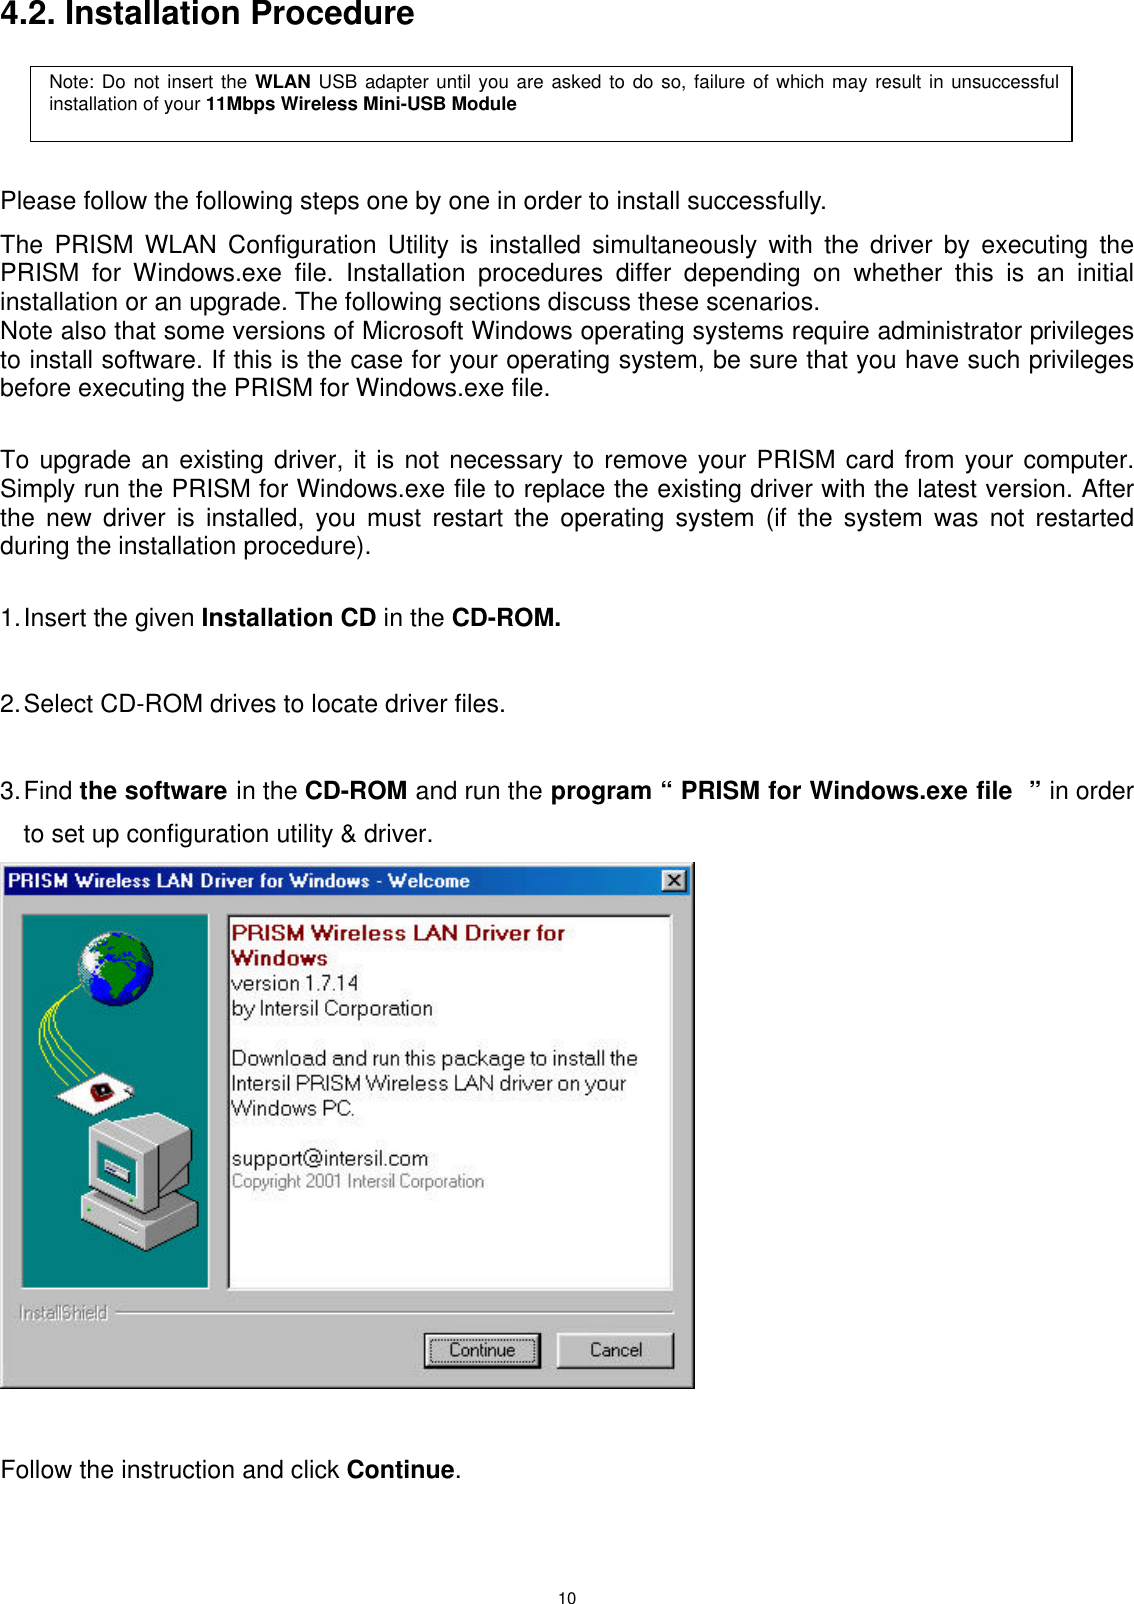  10 4.2. Installation Procedure     Please follow the following steps one by one in order to install successfully. The PRISM WLAN Configuration Utility is installed simultaneously with the driver by executing the PRISM for Windows.exe file. Installation procedures differ depending on whether this is an initial installation or an upgrade. The following sections discuss these scenarios. Note also that some versions of Microsoft Windows operating systems require administrator privileges to install software. If this is the case for your operating system, be sure that you have such privileges before executing the PRISM for Windows.exe file.  To upgrade an existing driver, it is not necessary to remove your PRISM card from your computer. Simply run the PRISM for Windows.exe file to replace the existing driver with the latest version. After the new driver is installed, you must restart the operating system (if the system was not restarted during the installation procedure).  1. Insert the given Installation CD in the CD-ROM.  2. Select CD-ROM drives to locate driver files.   3. Find the software in the CD-ROM and run the program “ PRISM for Windows.exe file  ” in order to set up configuration utility &amp; driver.     Follow the instruction and click Continue.   Note: Do not insert the WLAN USB adapter until you are asked to do so, failure of which may result in unsuccessful installation of your 11Mbps Wireless Mini-USB Module  